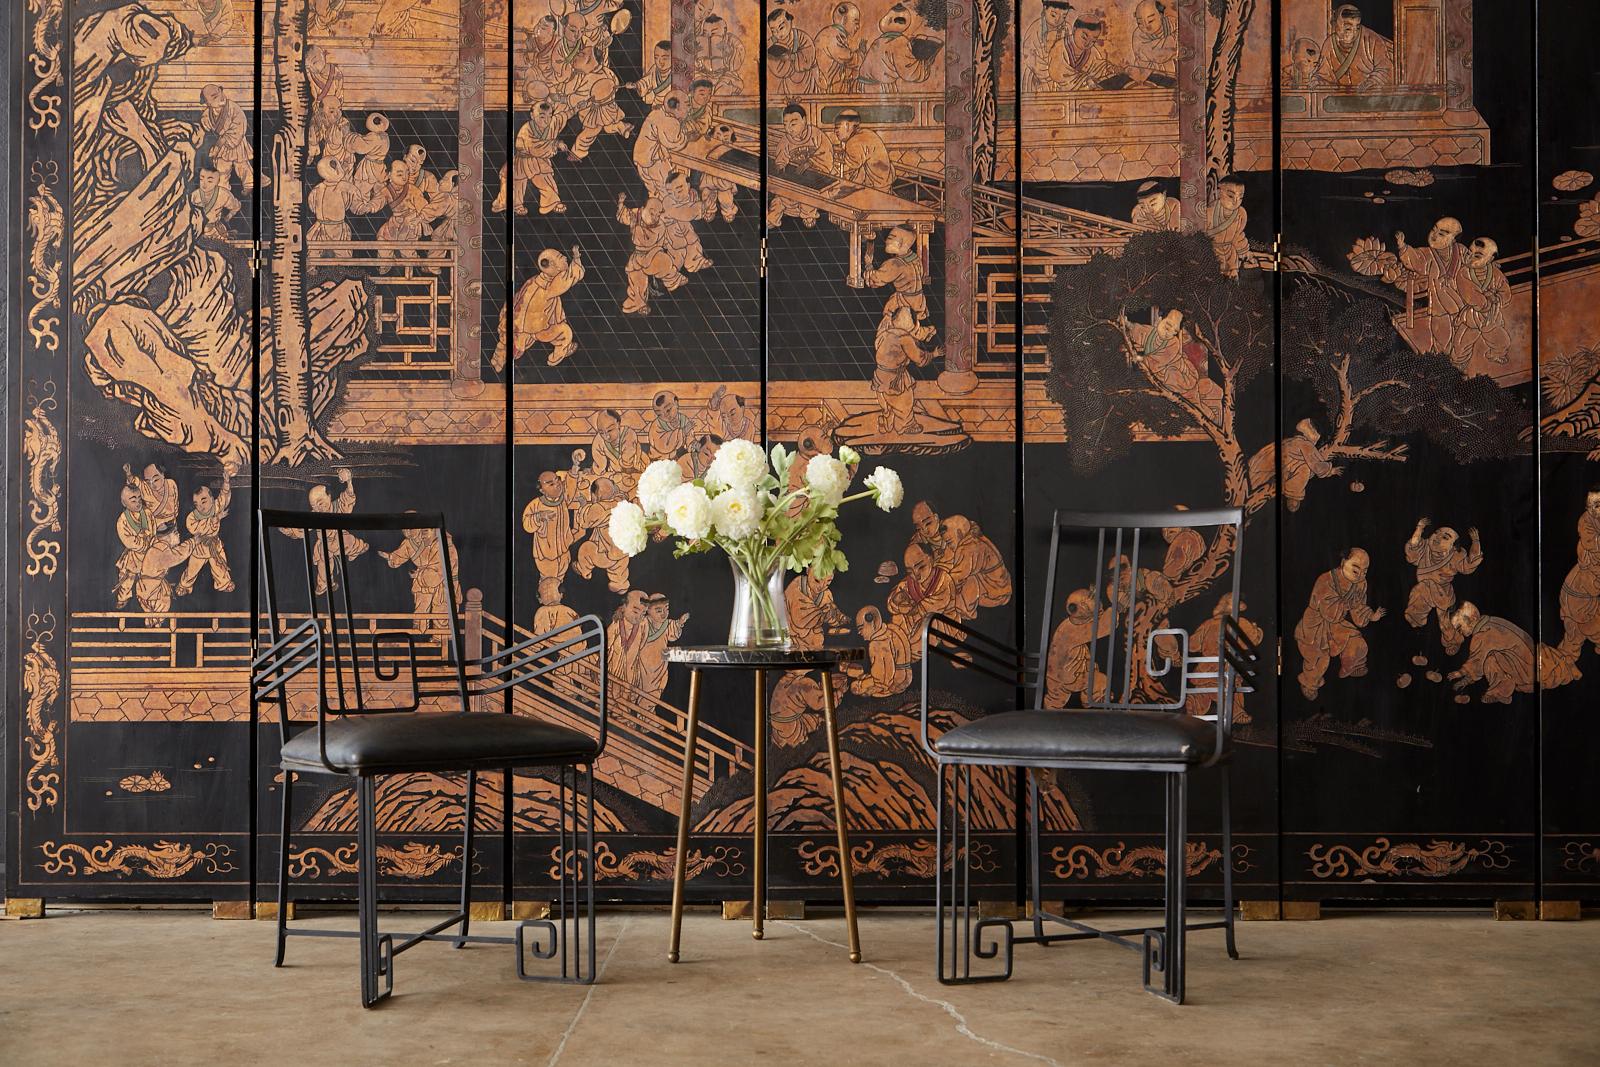 Stunning monumental Chinese export twelve-panel gilt Coromandel screen. Featuring an intricately relief carved black lacquered background depicting one hundred boys in a courtyard playing at leisurely activities. The beautifully incised panels are